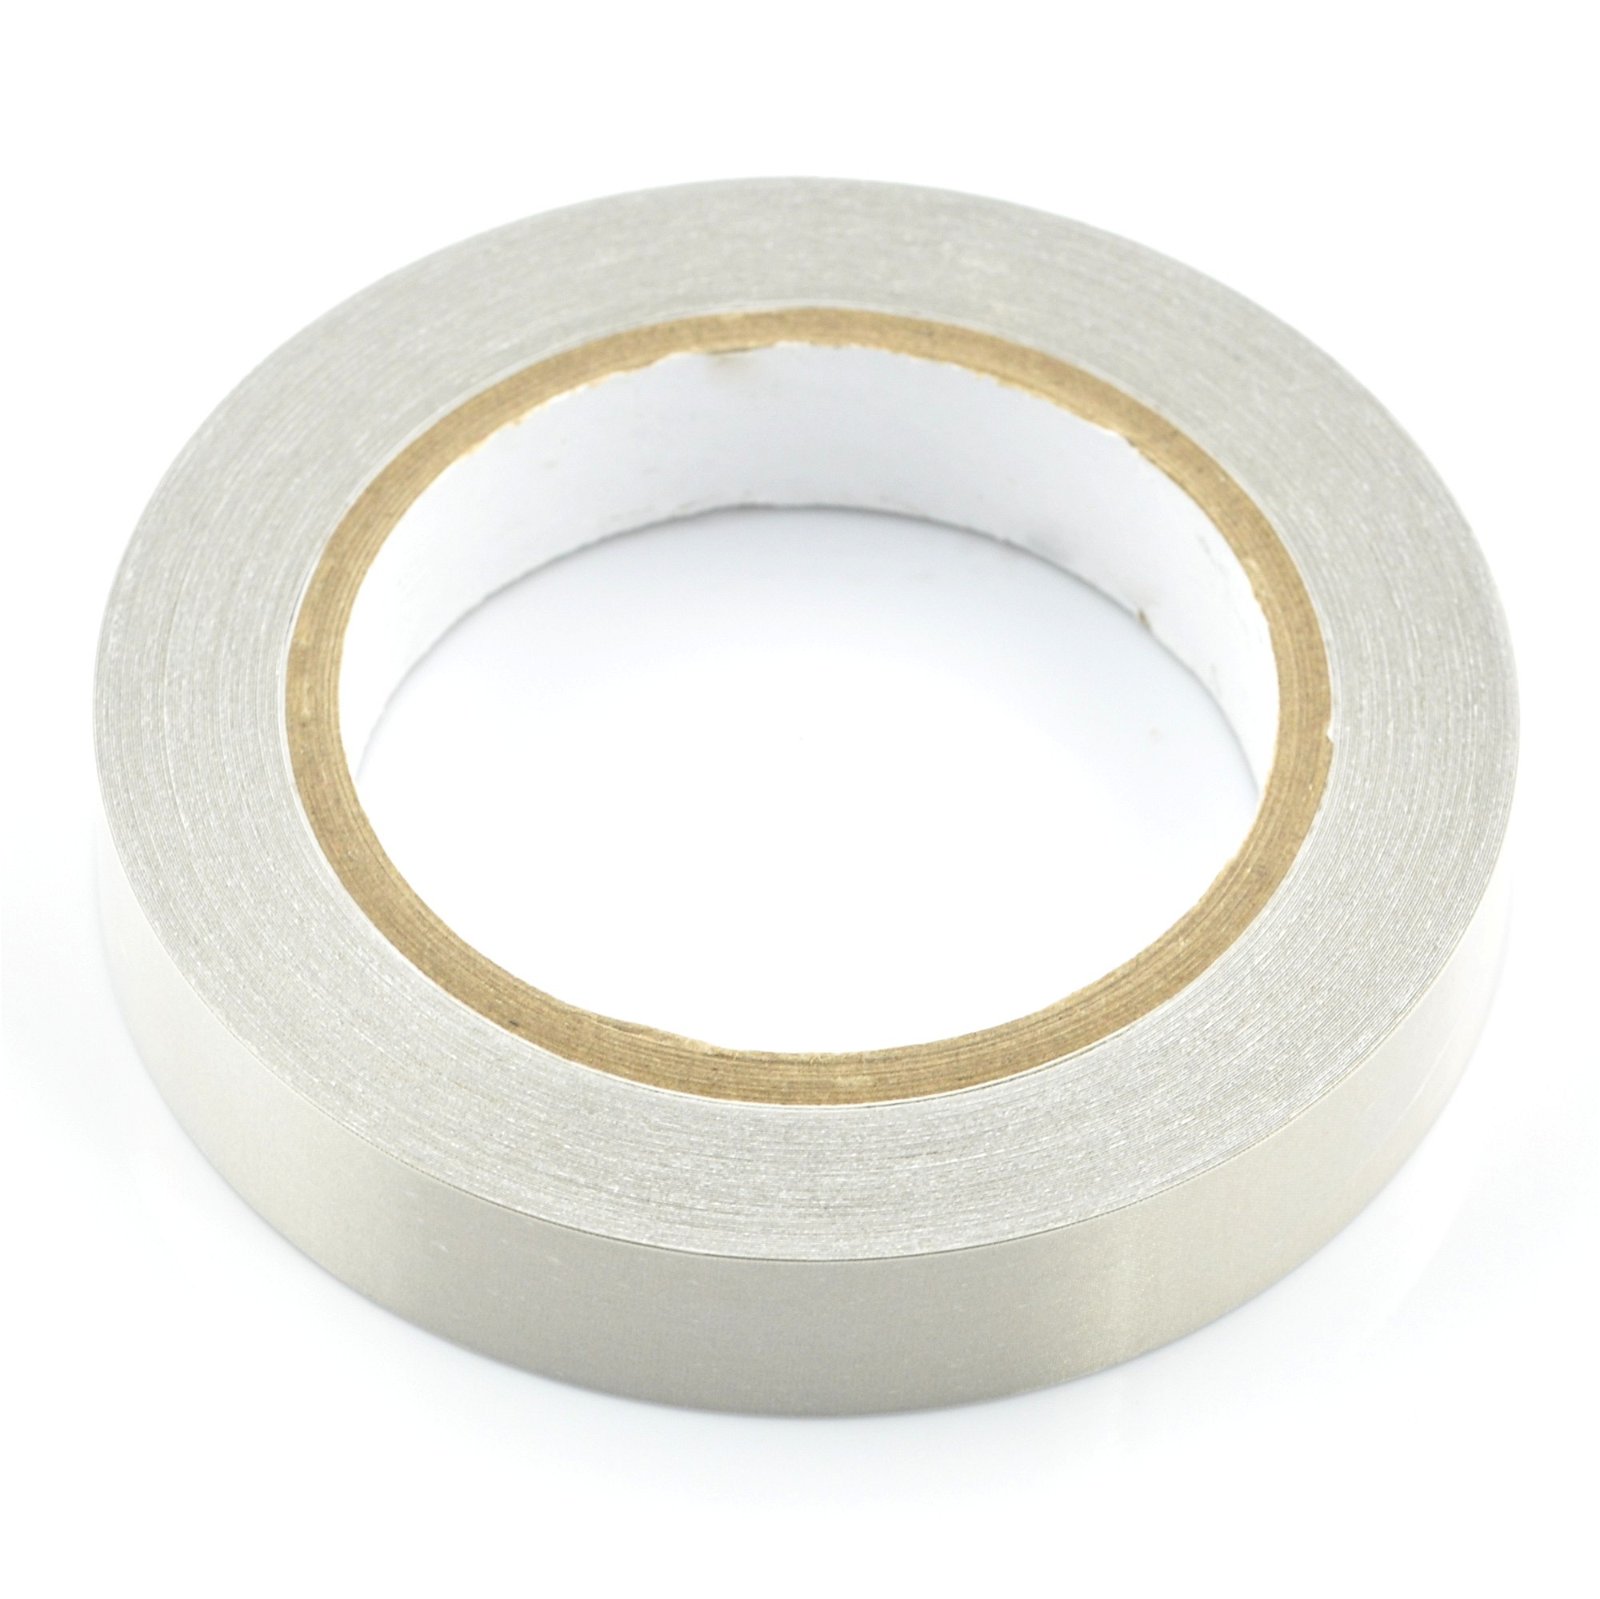 Conductive tape with 20 mm adhesive